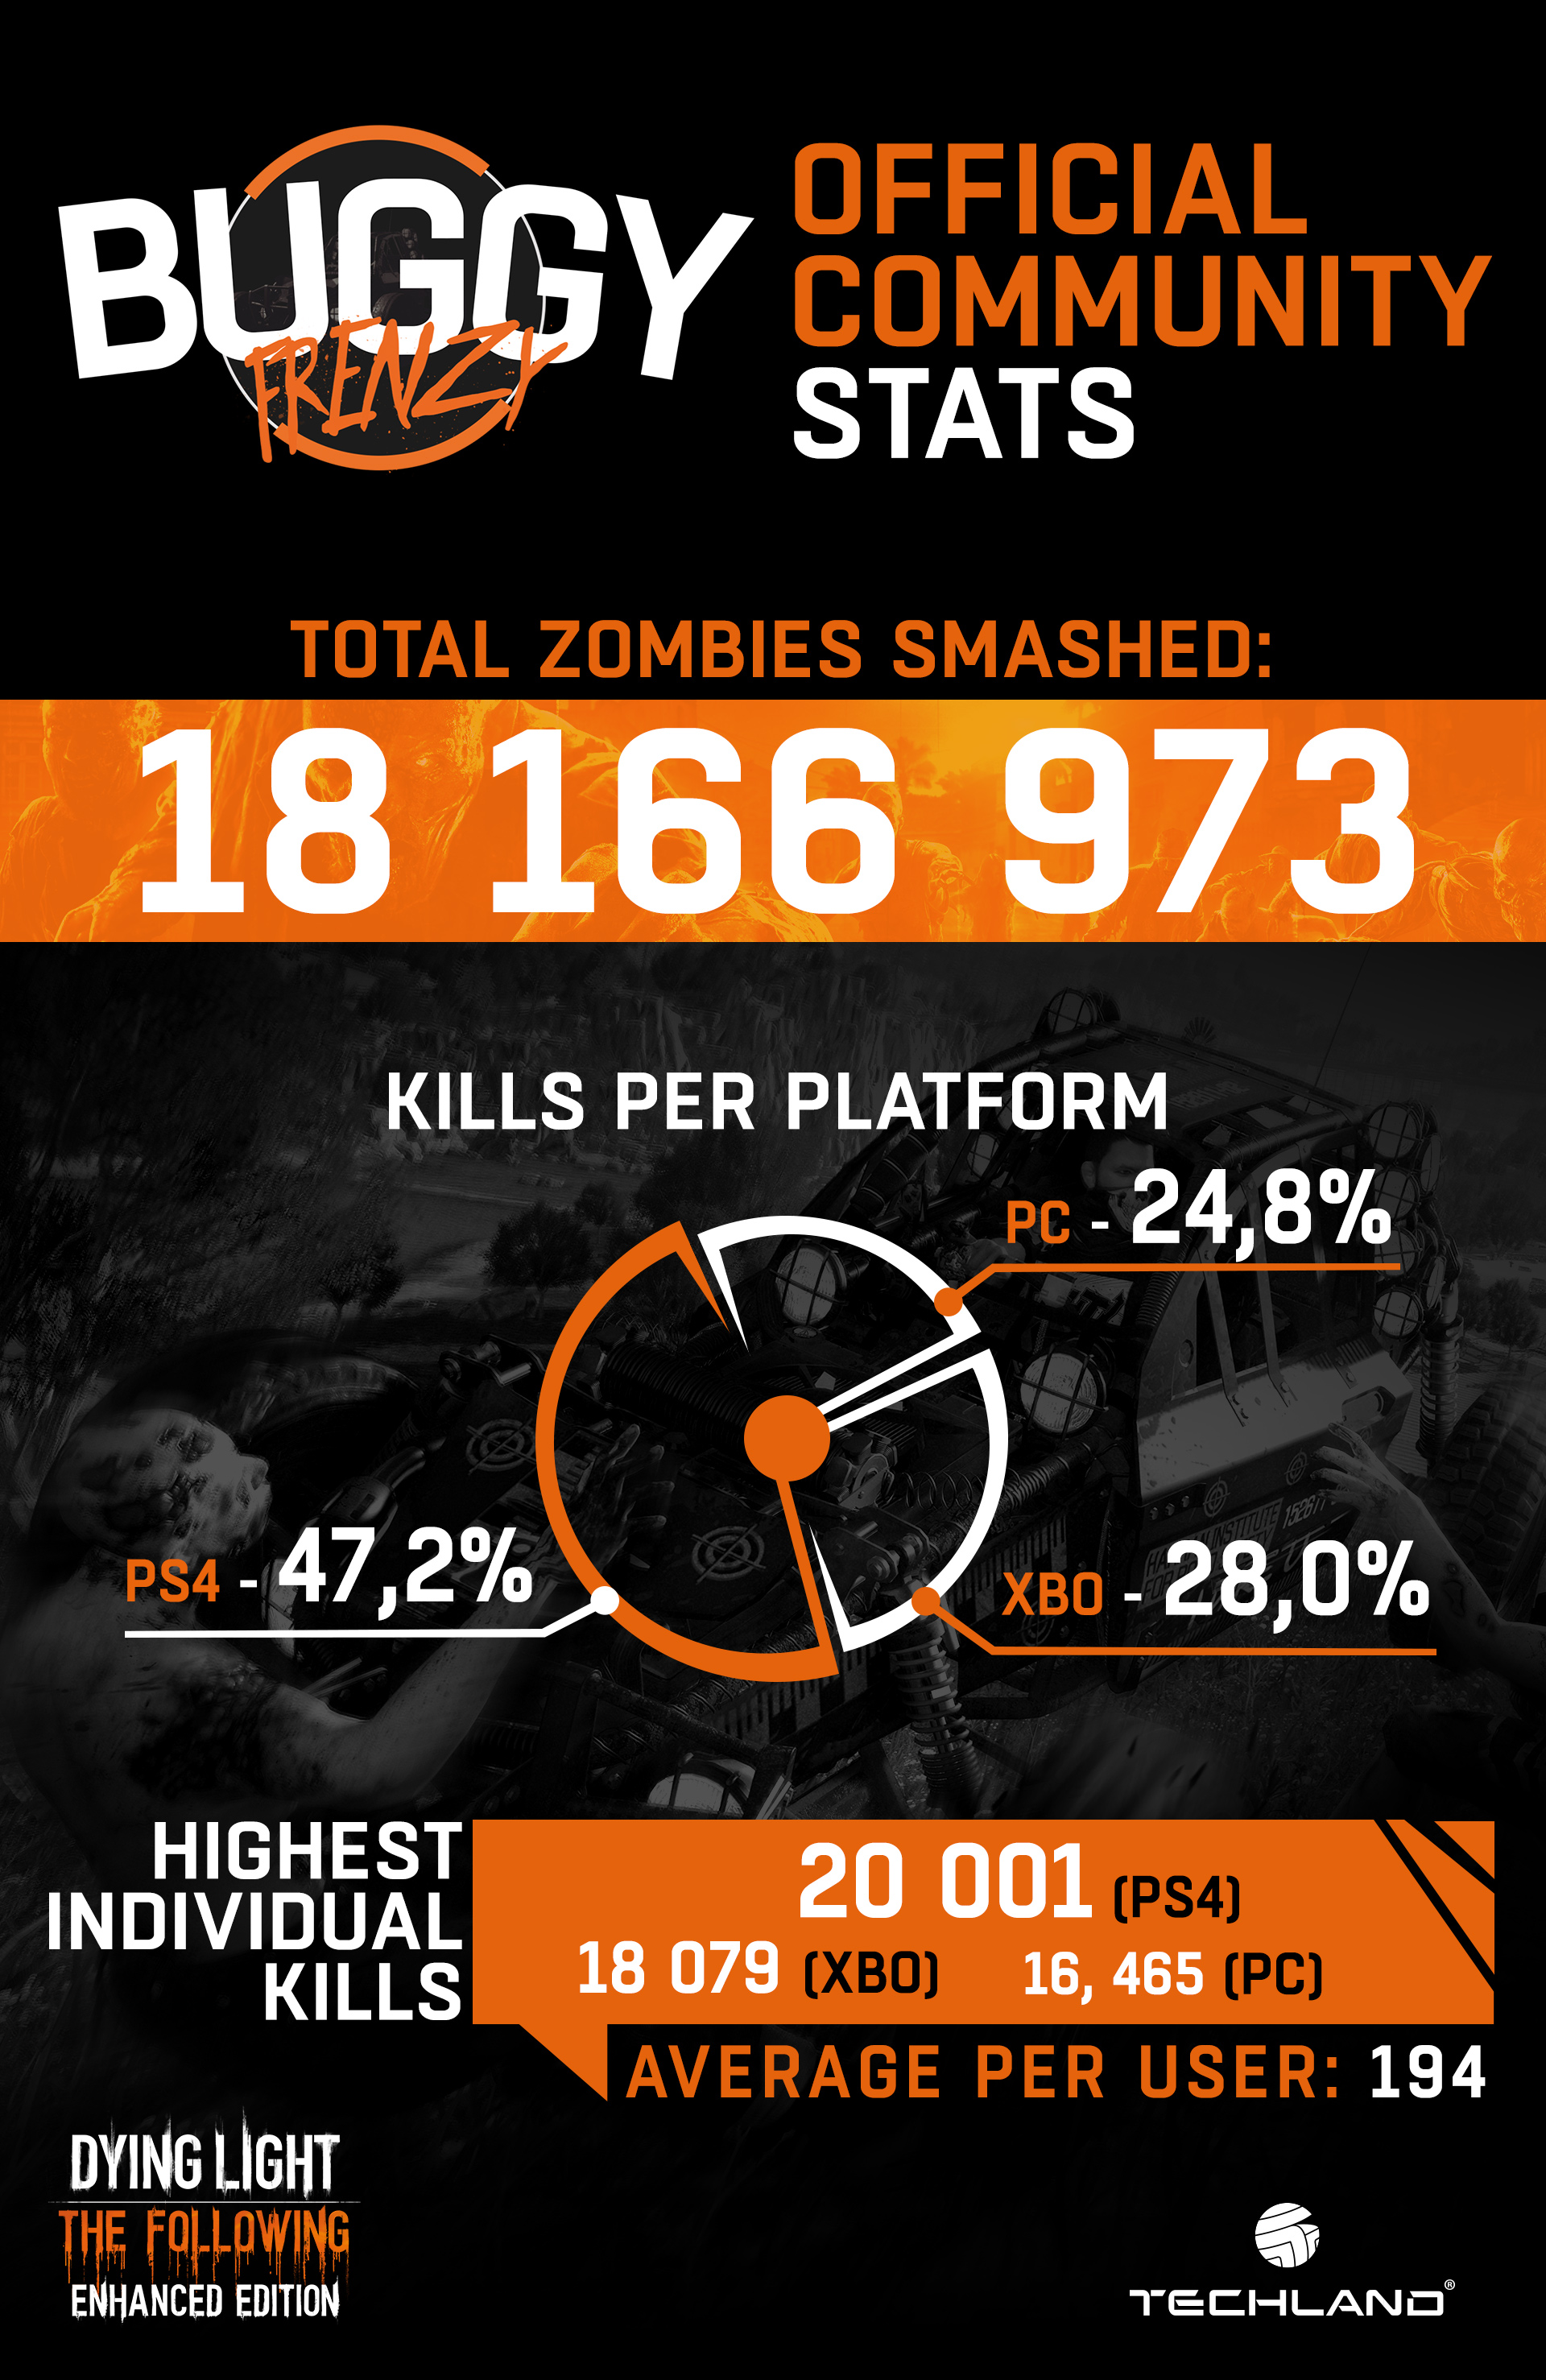 Dying_Light_Buggy_Frenzy_Infographic